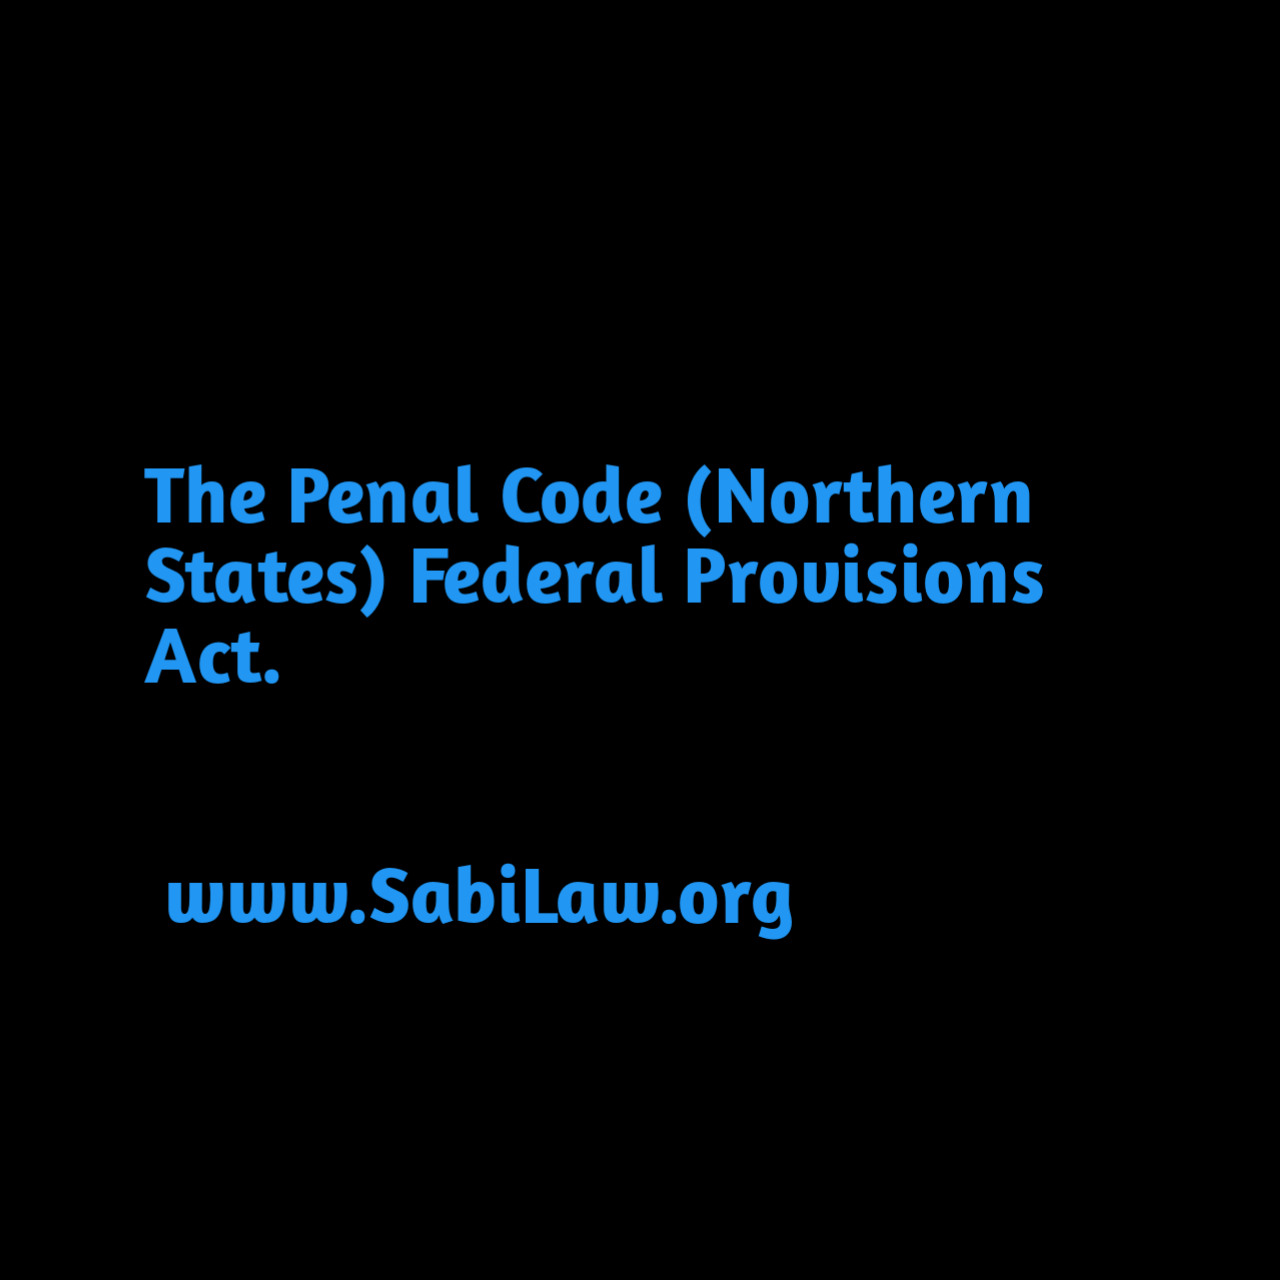 The Penal Code (Northern States) Federal Provisions Act